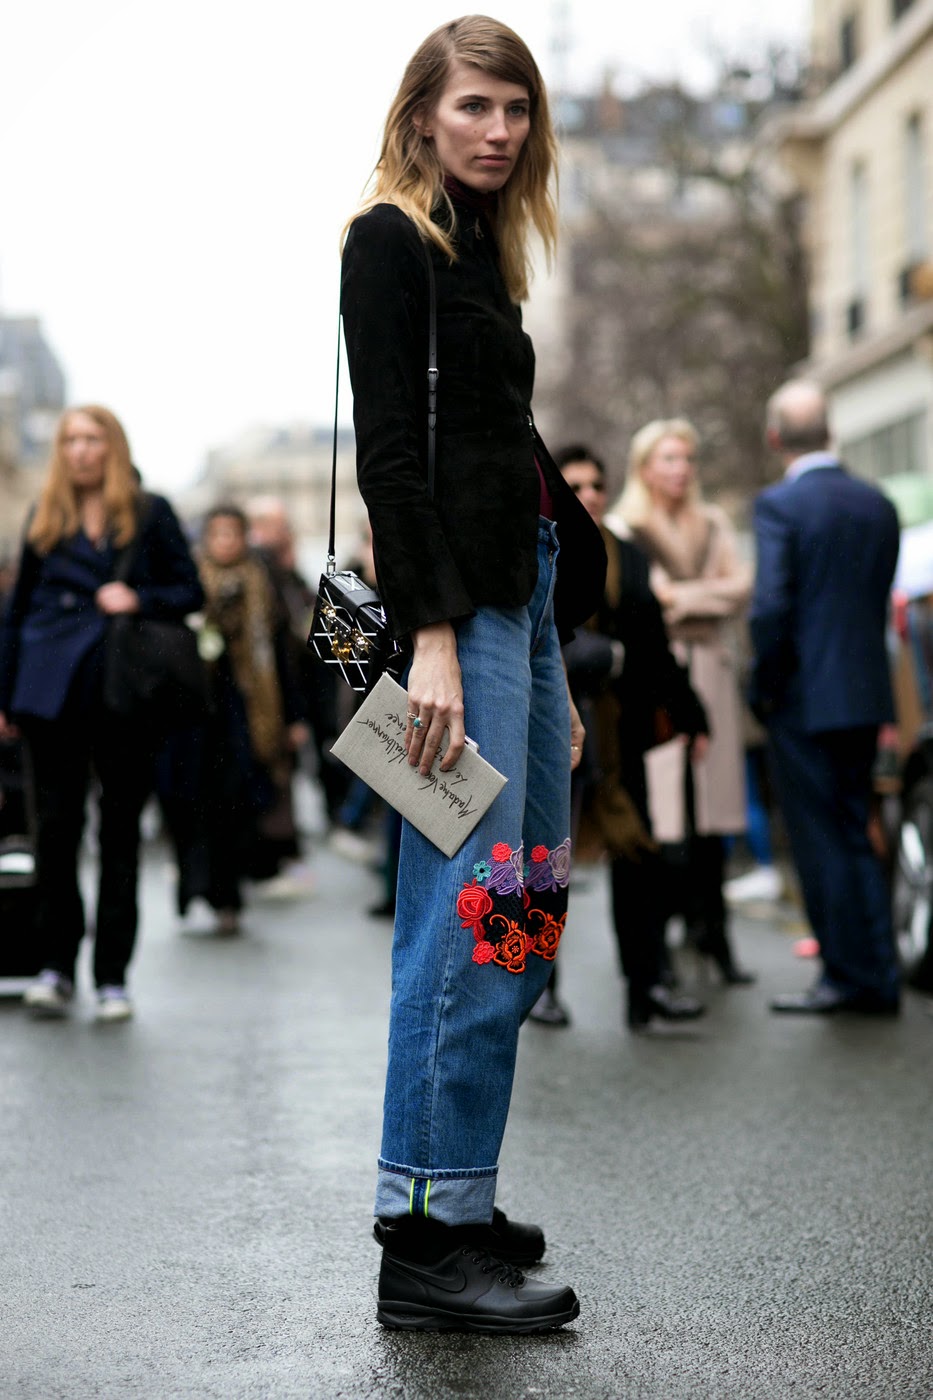 Couture Fashion Week Street Style: Editors & Attendees - The Front Row View